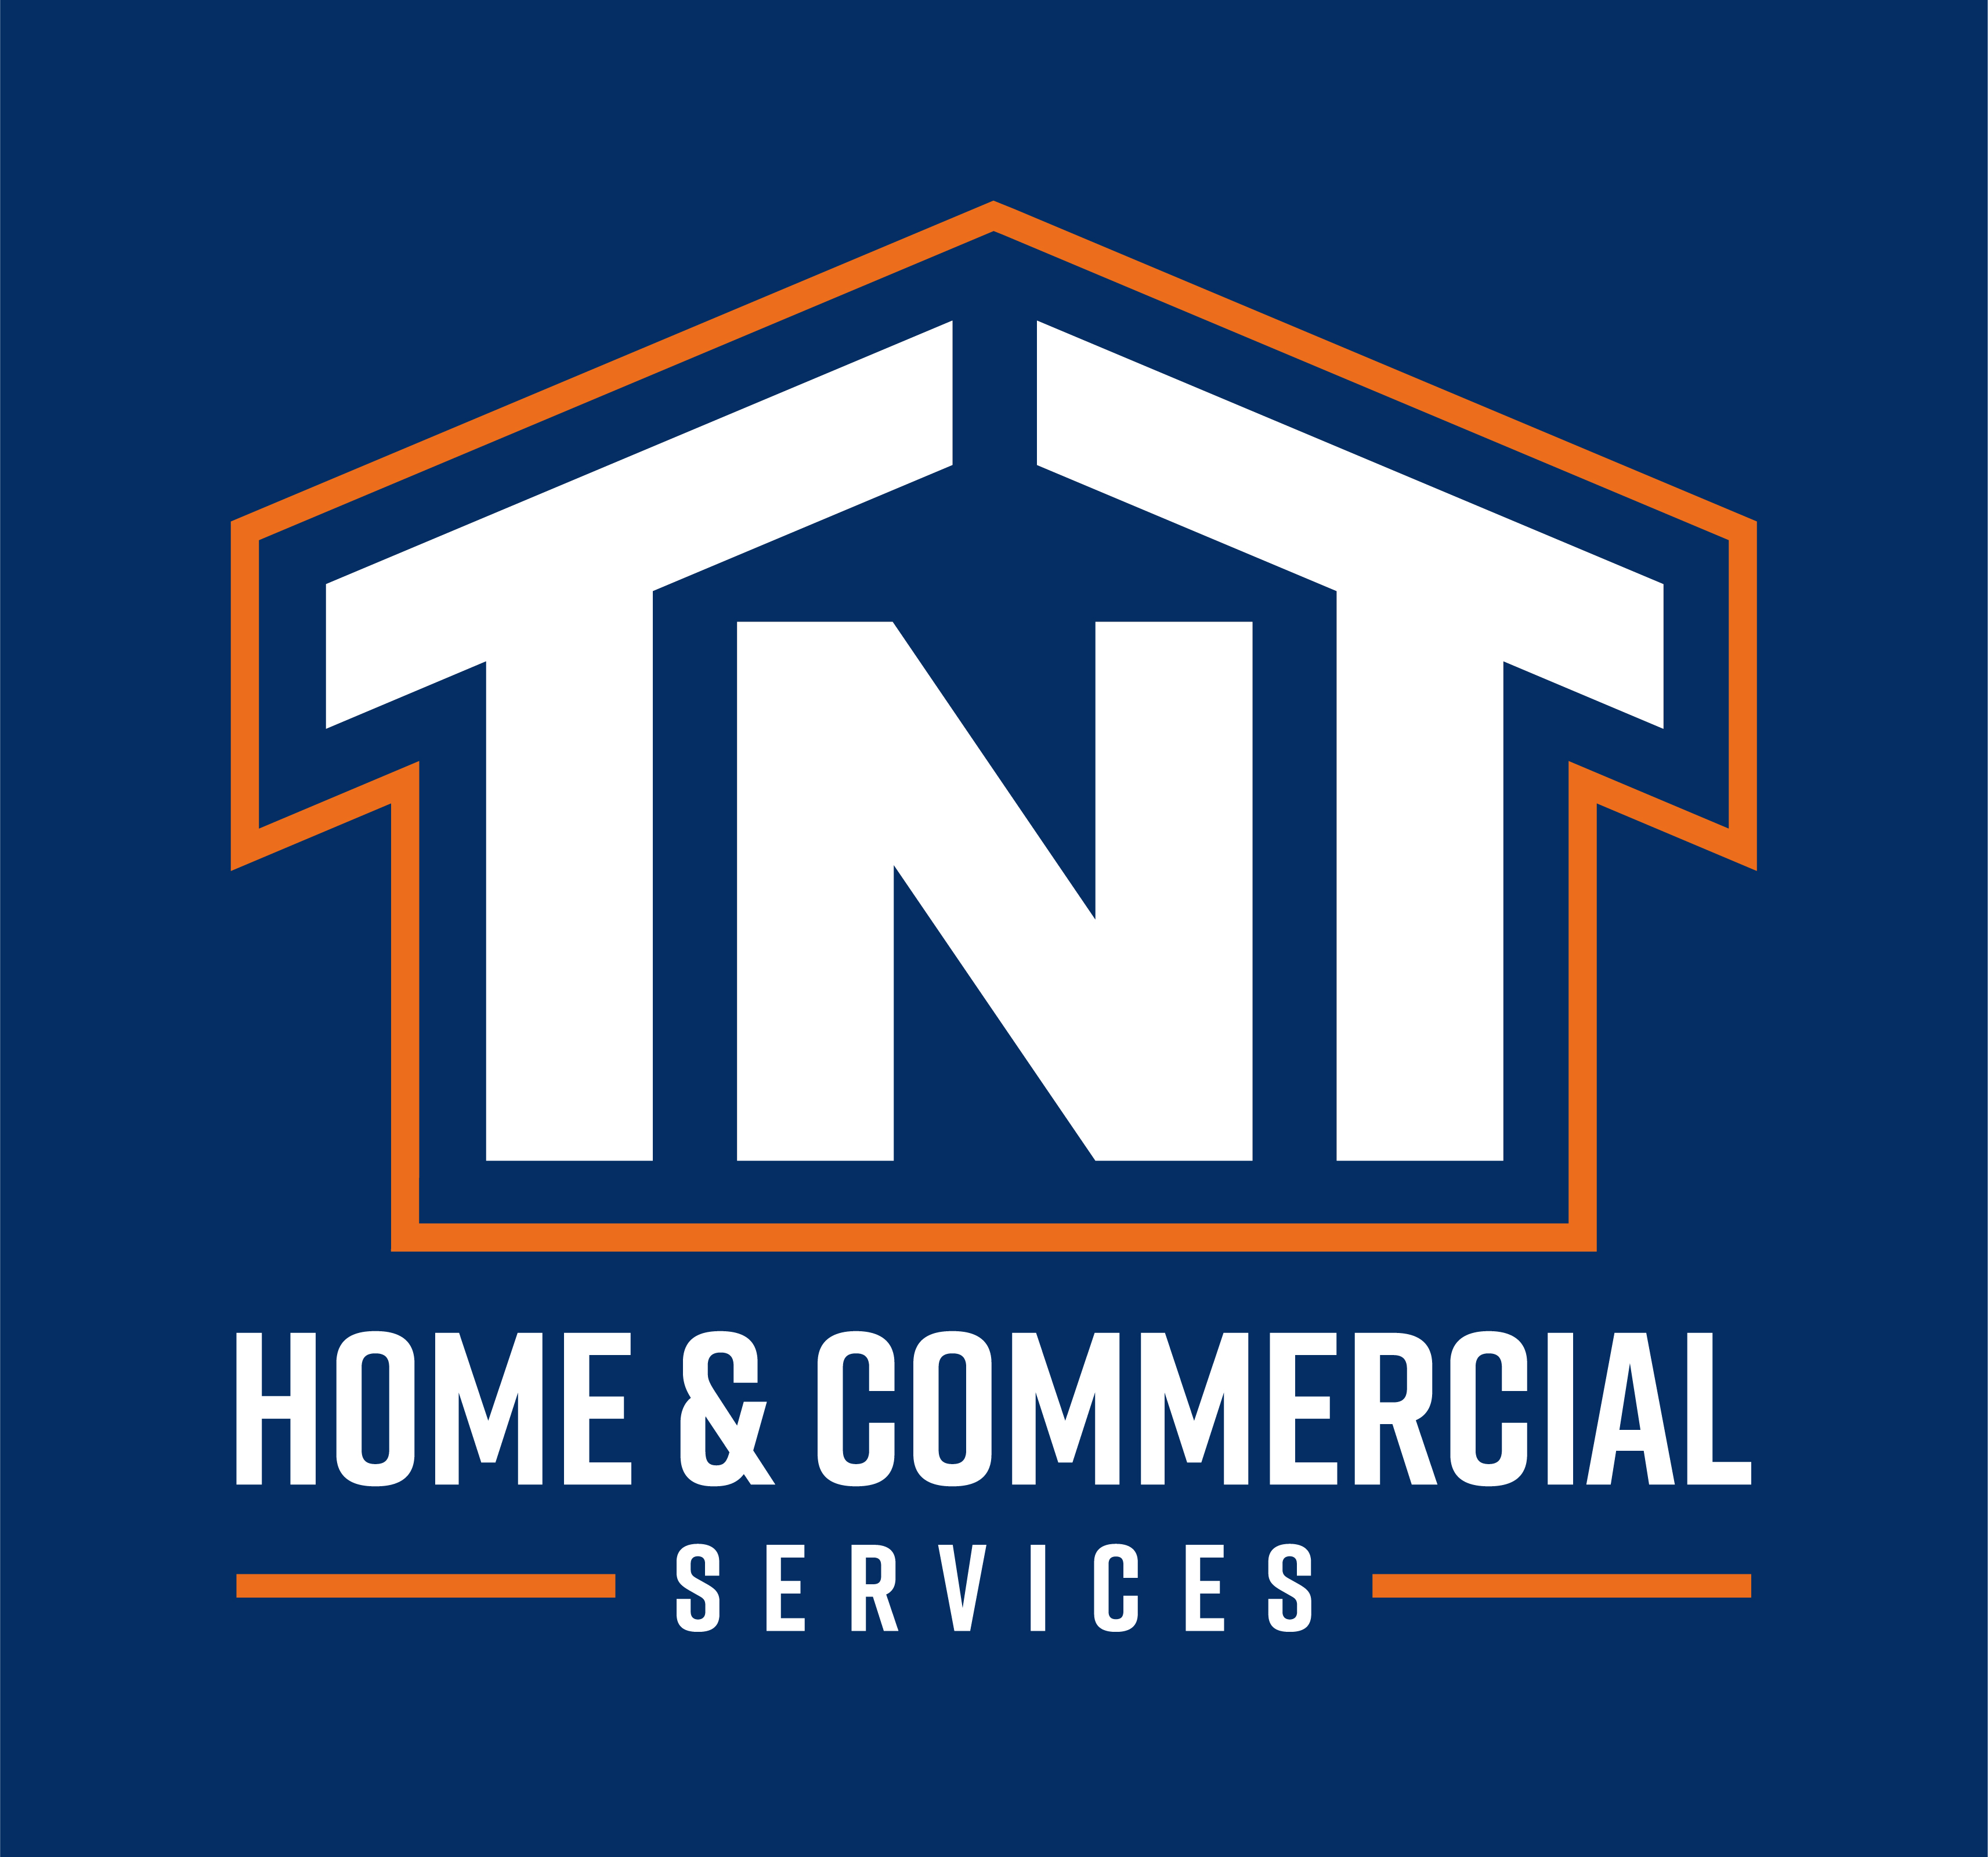 TNT Home and Commercial Services Logo